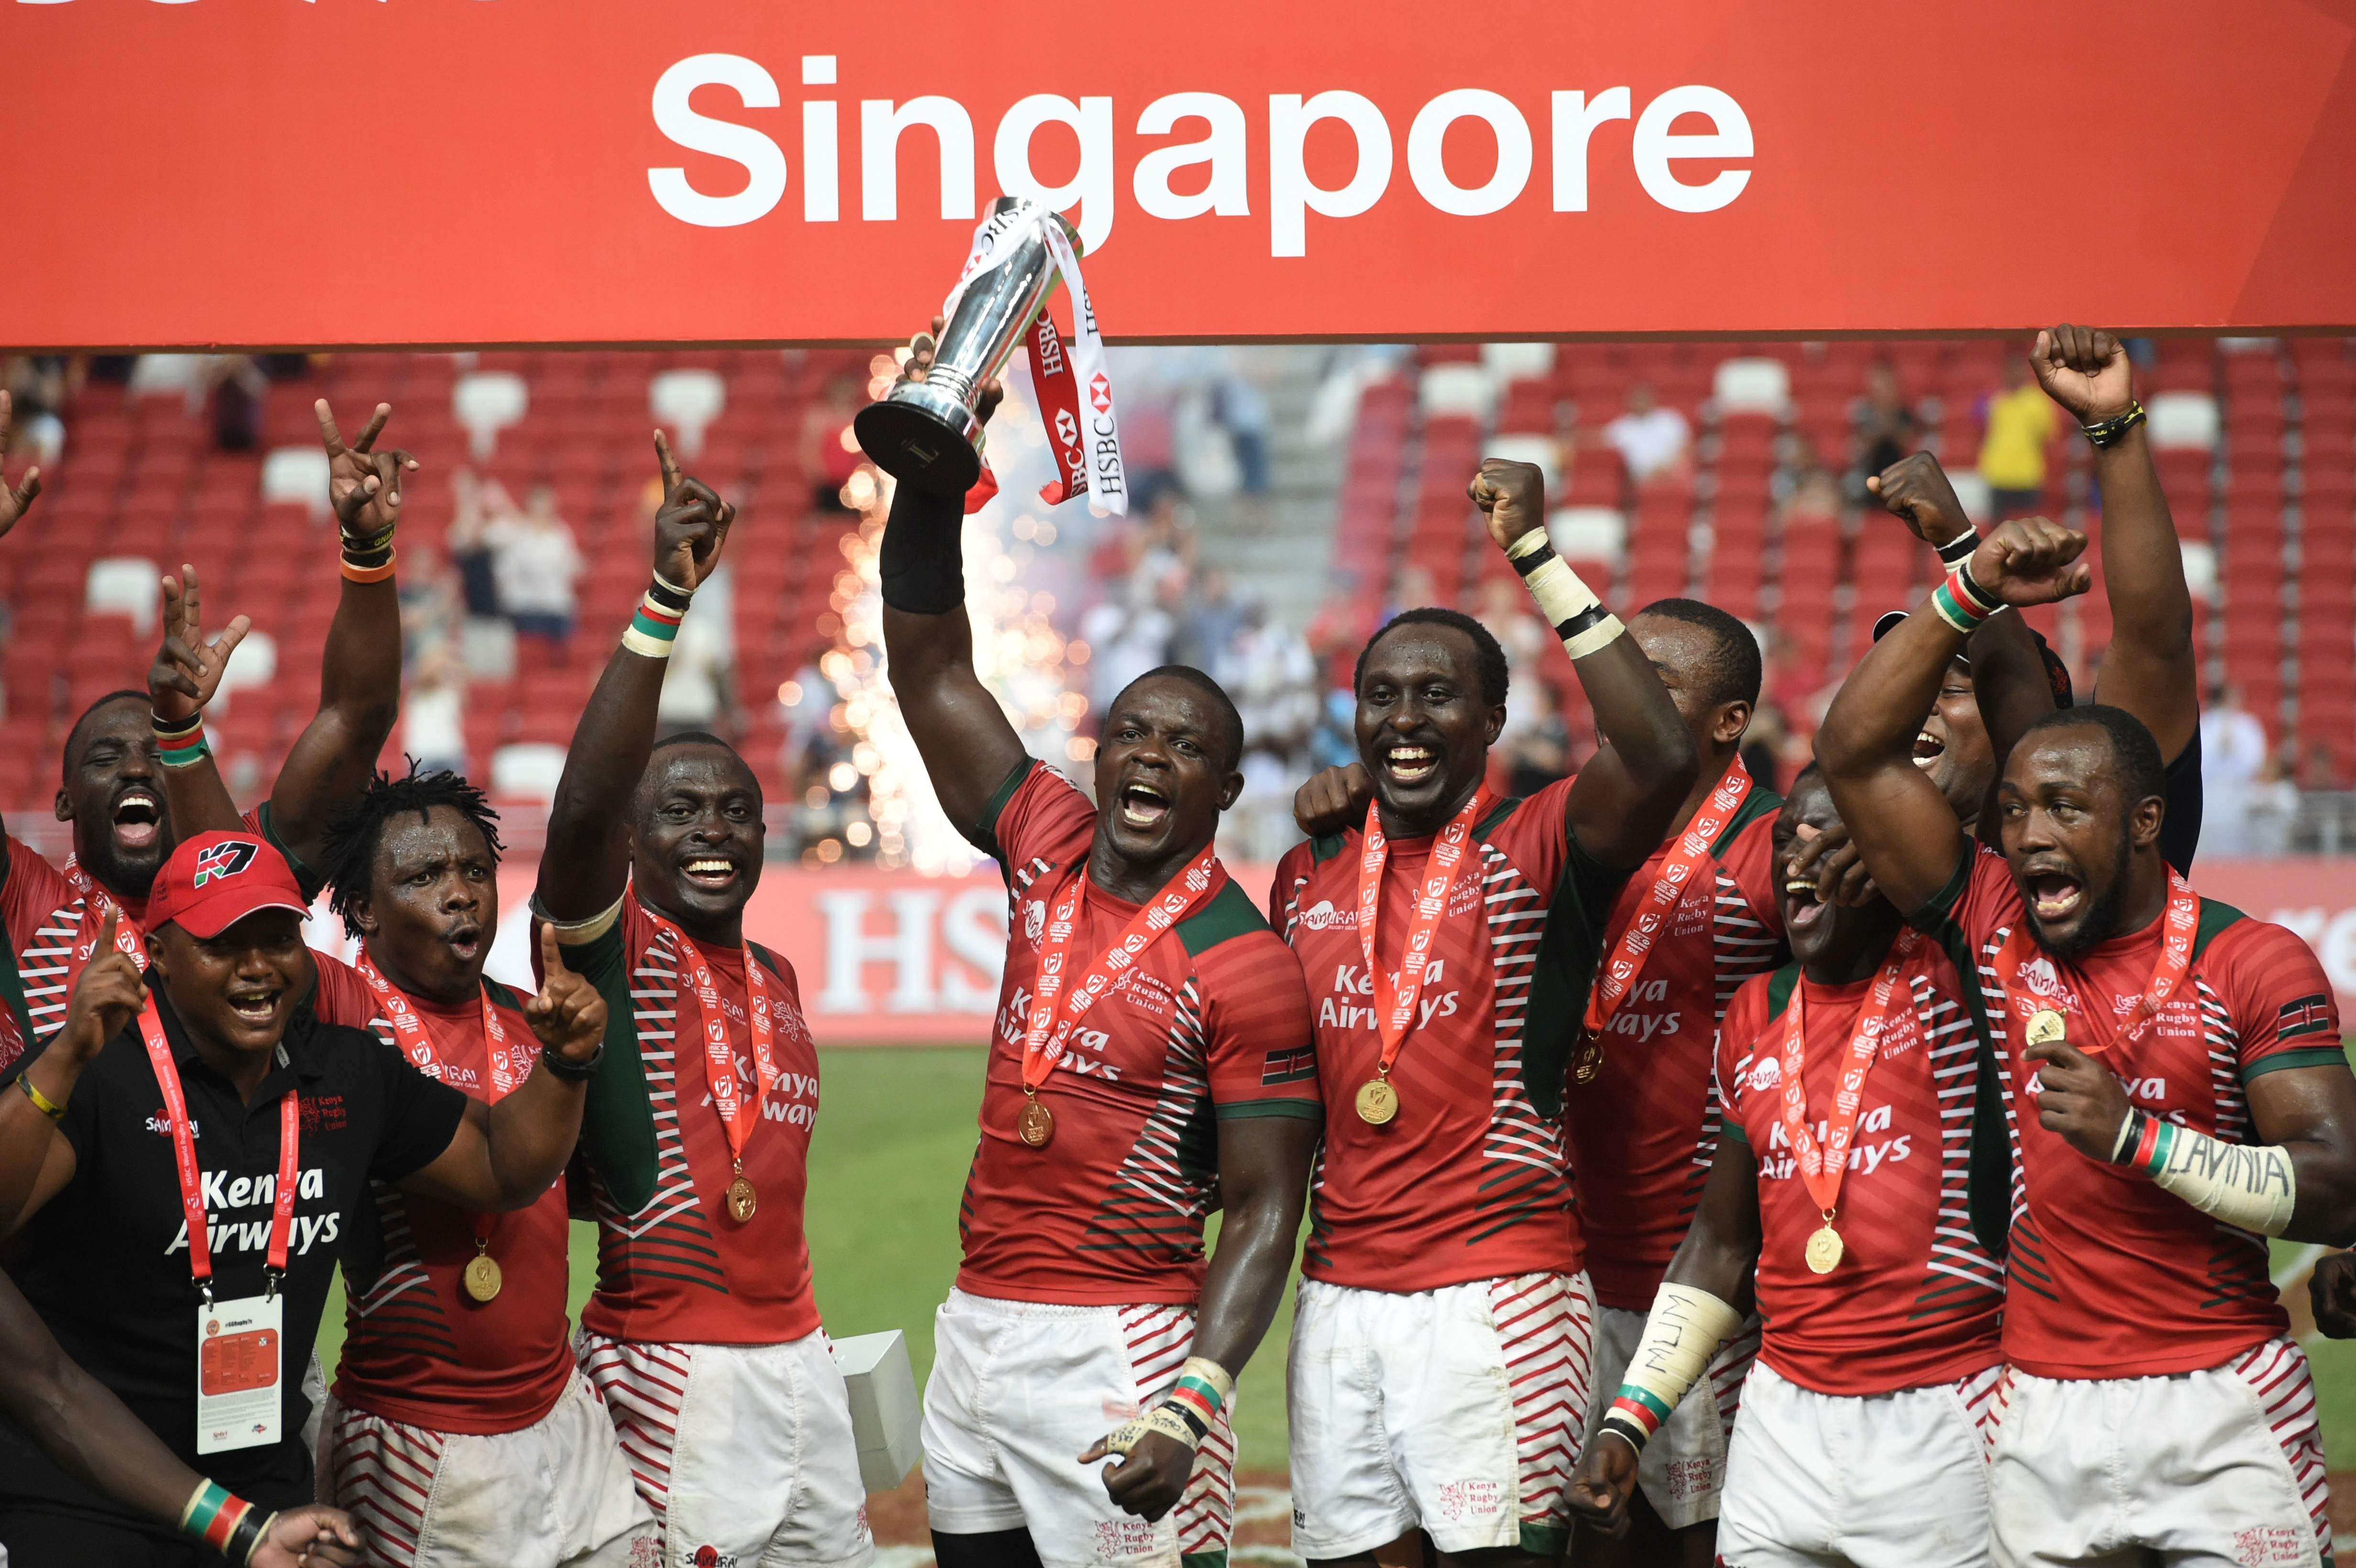 Kenya's team celebrate with the trophy after defeating Fiji in the cup final at the Singapore Sevens. Photo: AFP